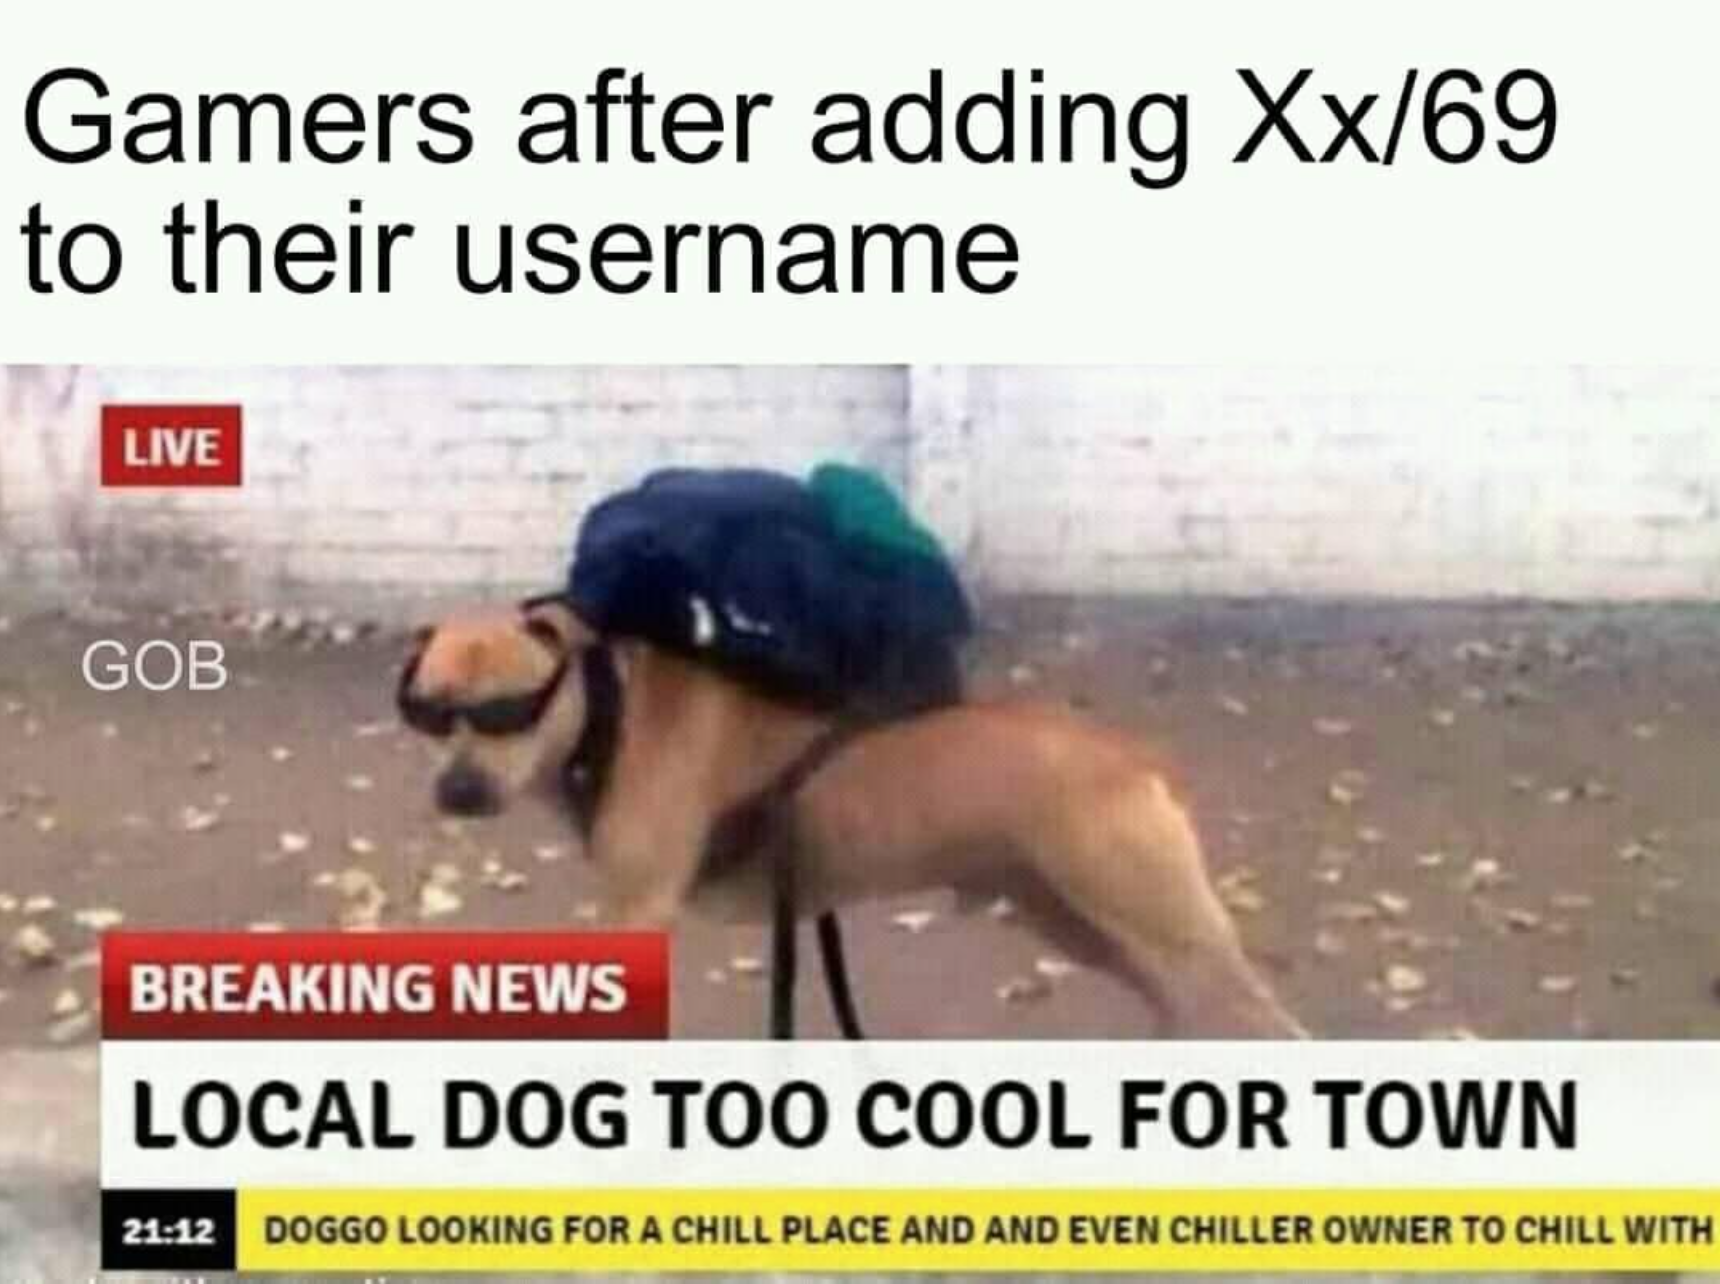 local dog too cool for town - Gamers after adding Xx69 to their username Live Gob Breaking News Local Dog Too Cool For Town Doggo Looking For A Chill Place And And Even Chiller Owner To Chill With